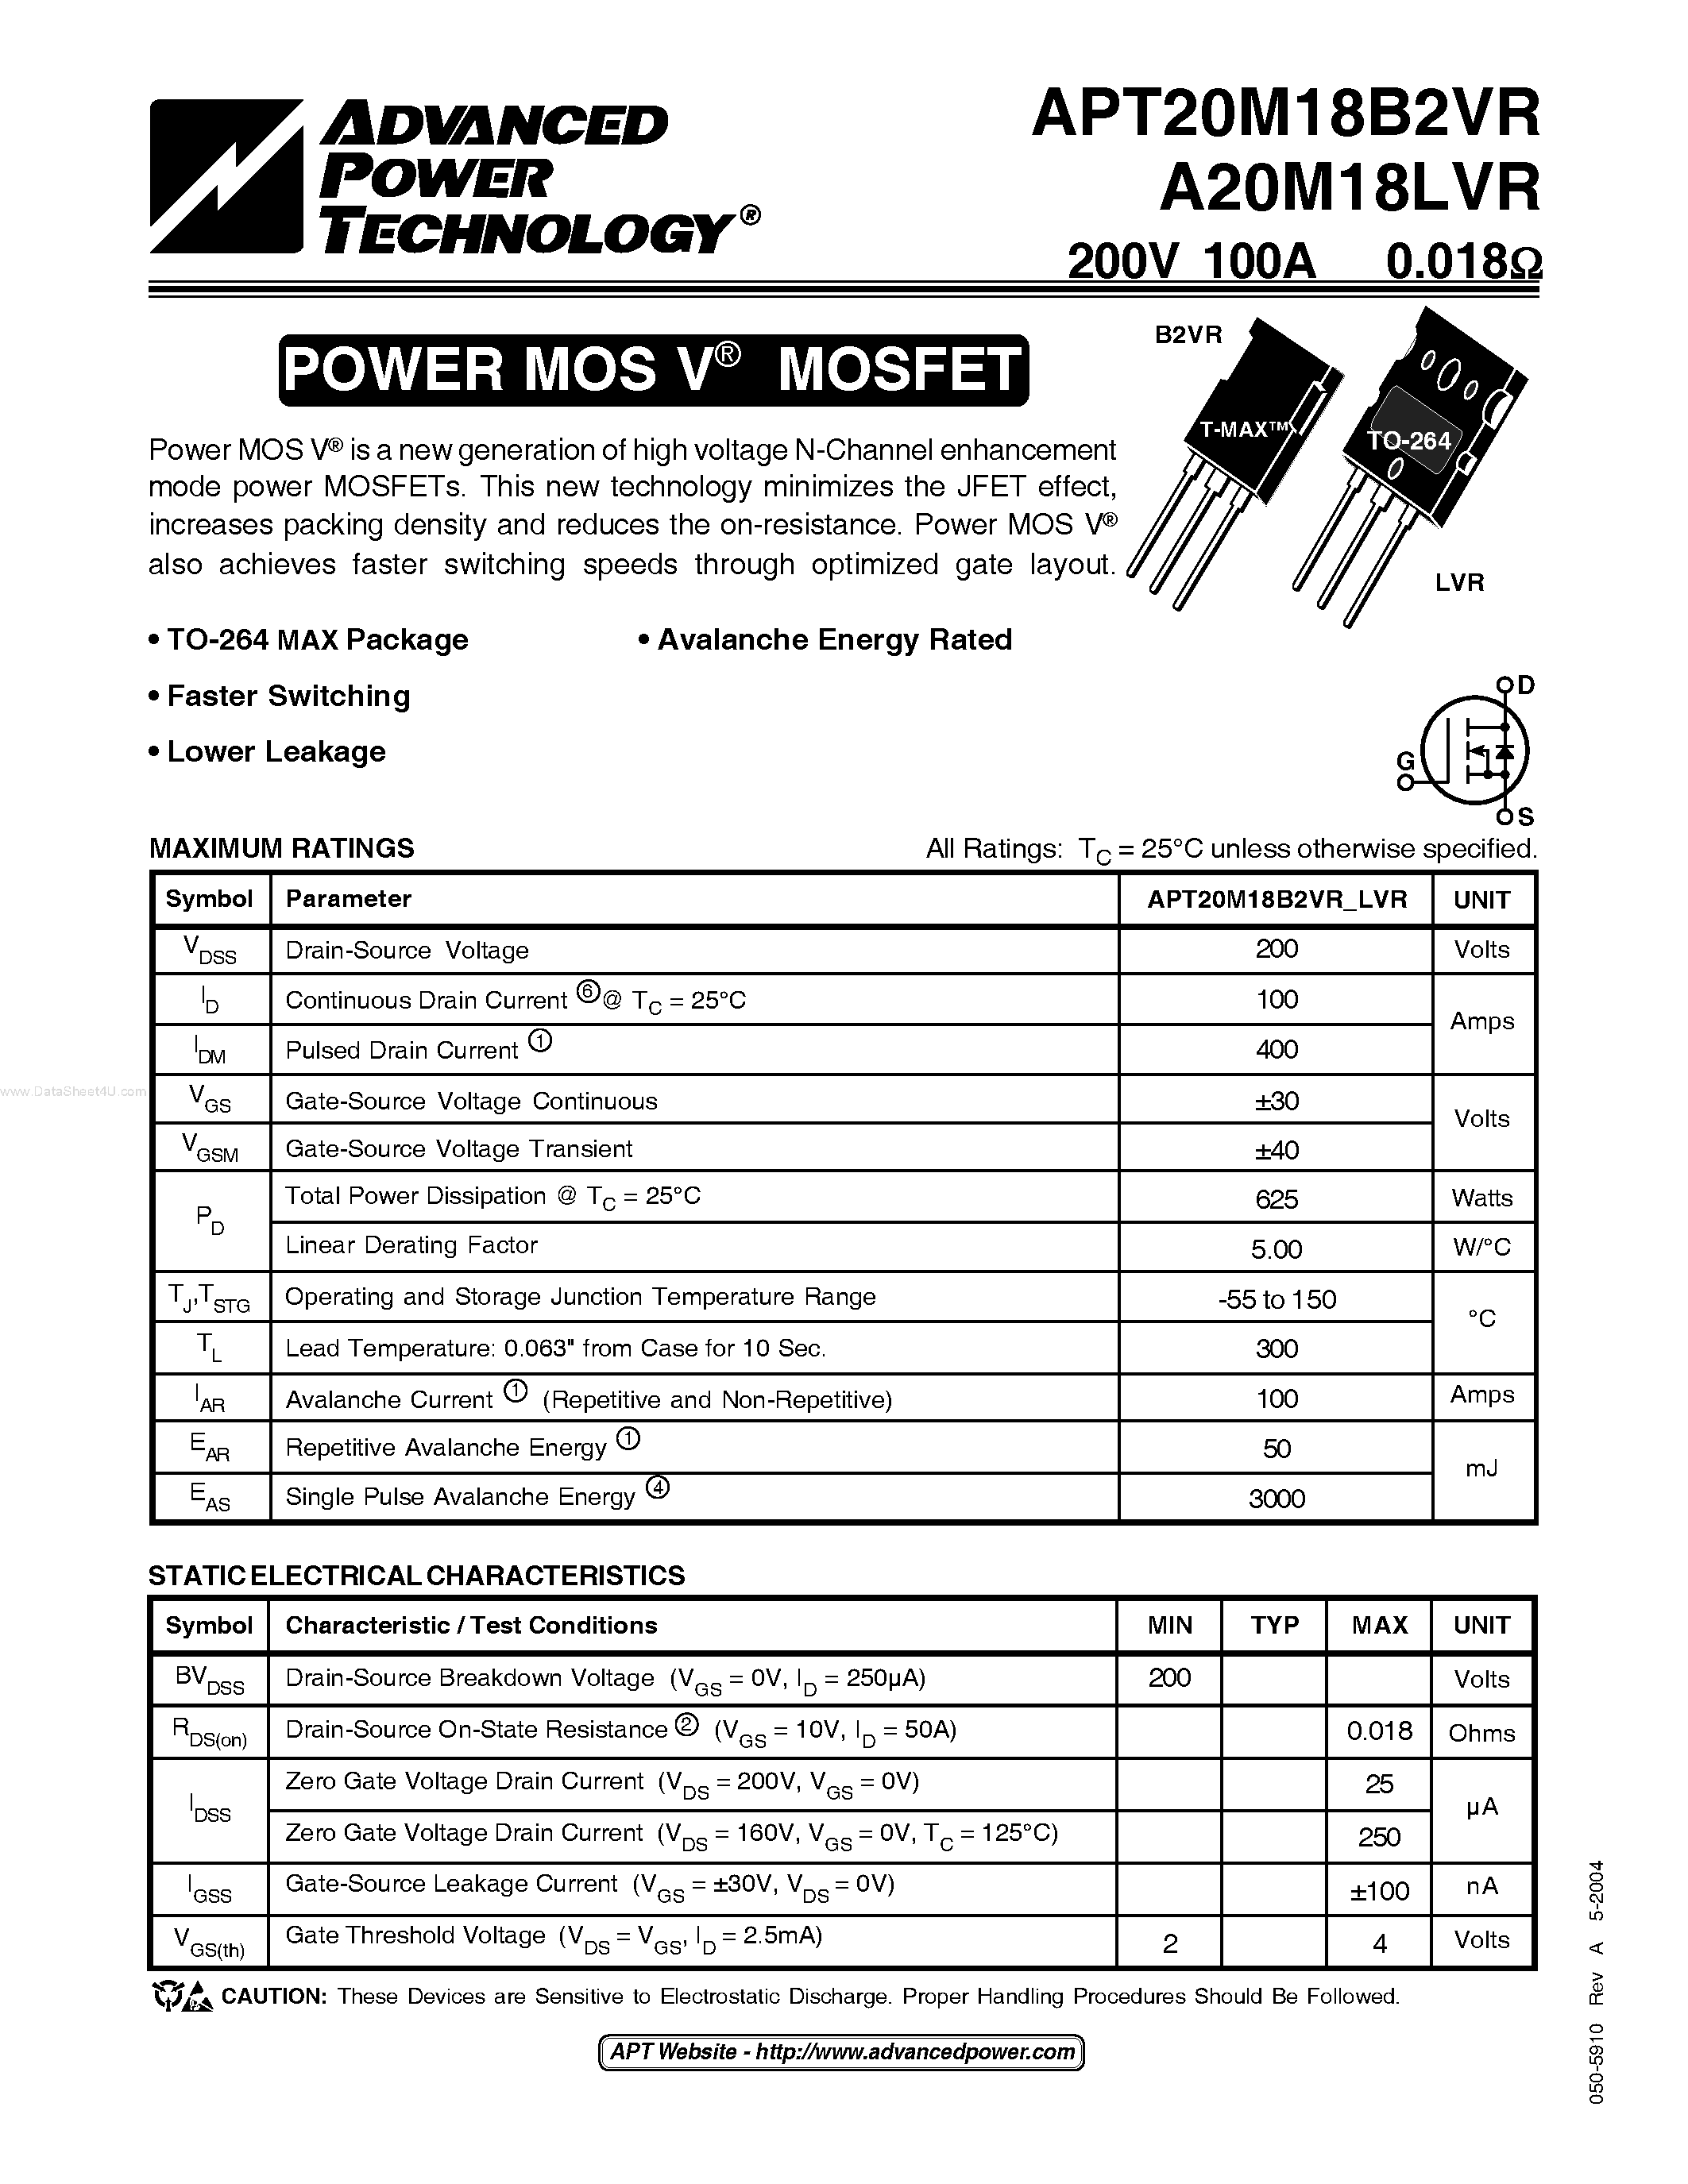 Datasheet A20M18LVR - POWER MOS V MOSFET page 1